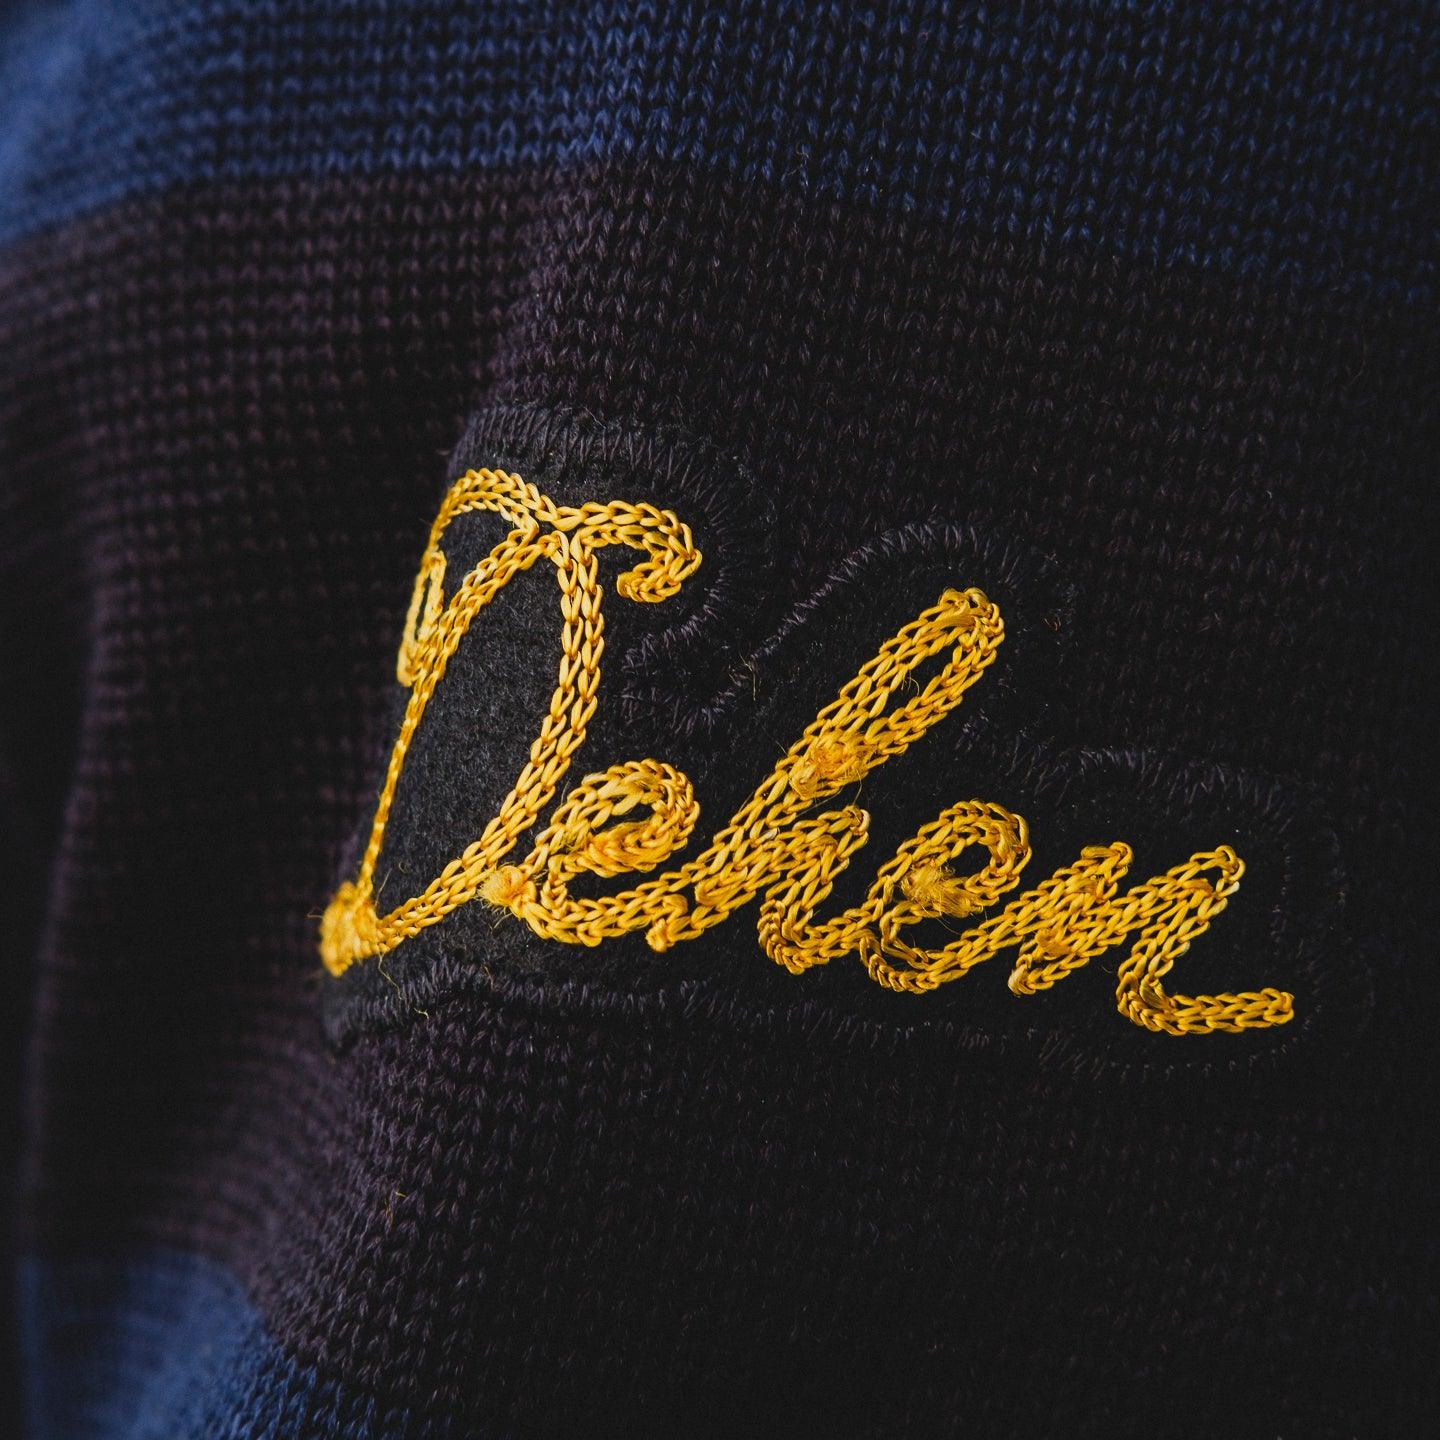 Image showing the DE-IHB-Custom-BLK - 1/4 Zip Moto-Jersey BERLIN - Black/ D.Navy which is a Knitwear described by the following info Dehen 1920, IHSALE_M23, Knitwear, Released, Tops and sold on the IRON HEART GERMANY online store